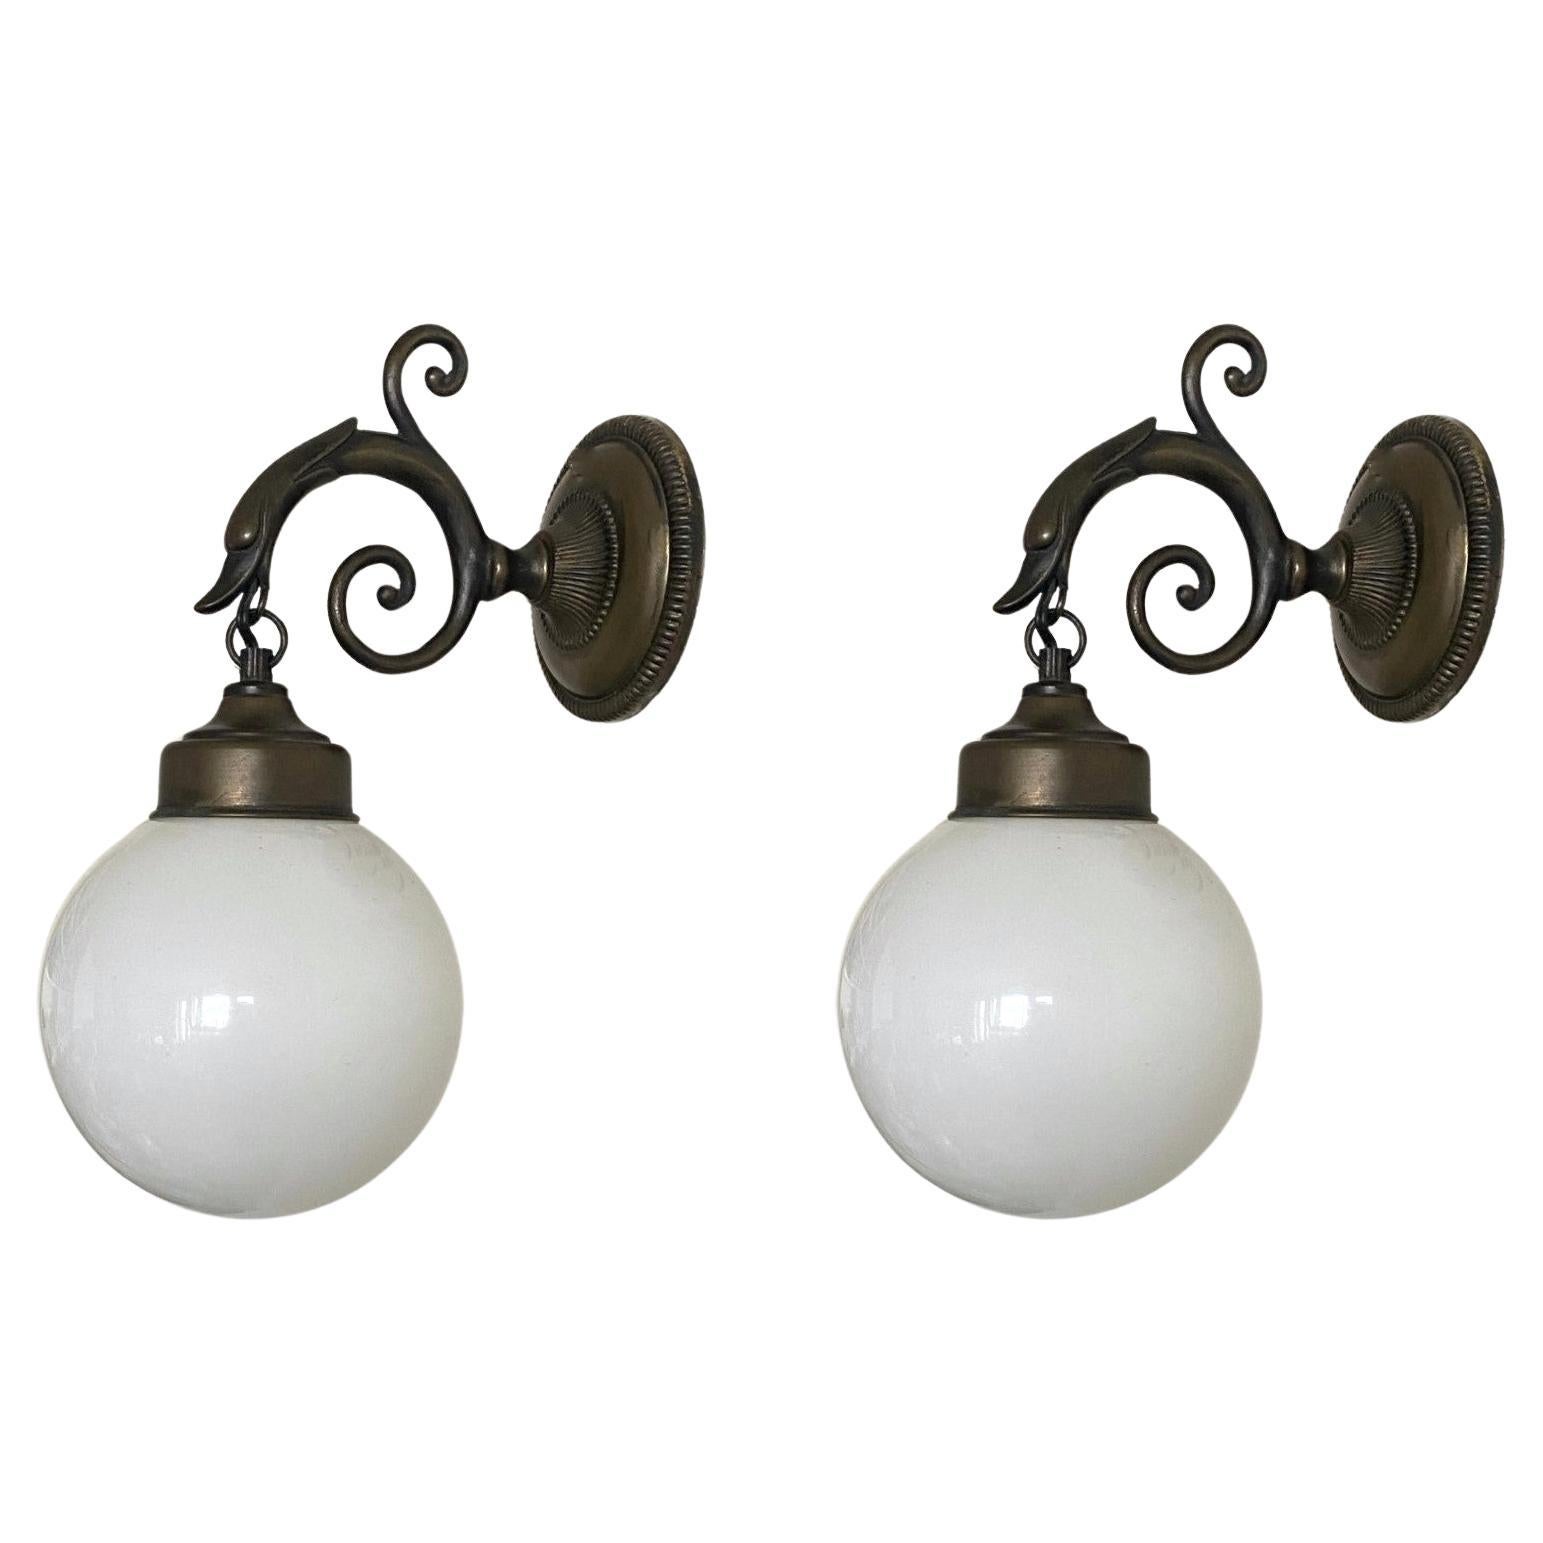 Set of three  lovely bronzed brass bird wall sconces with opaline glass ball globes, for indoor and outdoor use, France, 1930-1939.
All three pieces sconces are in very good condition, beautiful patina to brass, fully functional. Each sconce takes